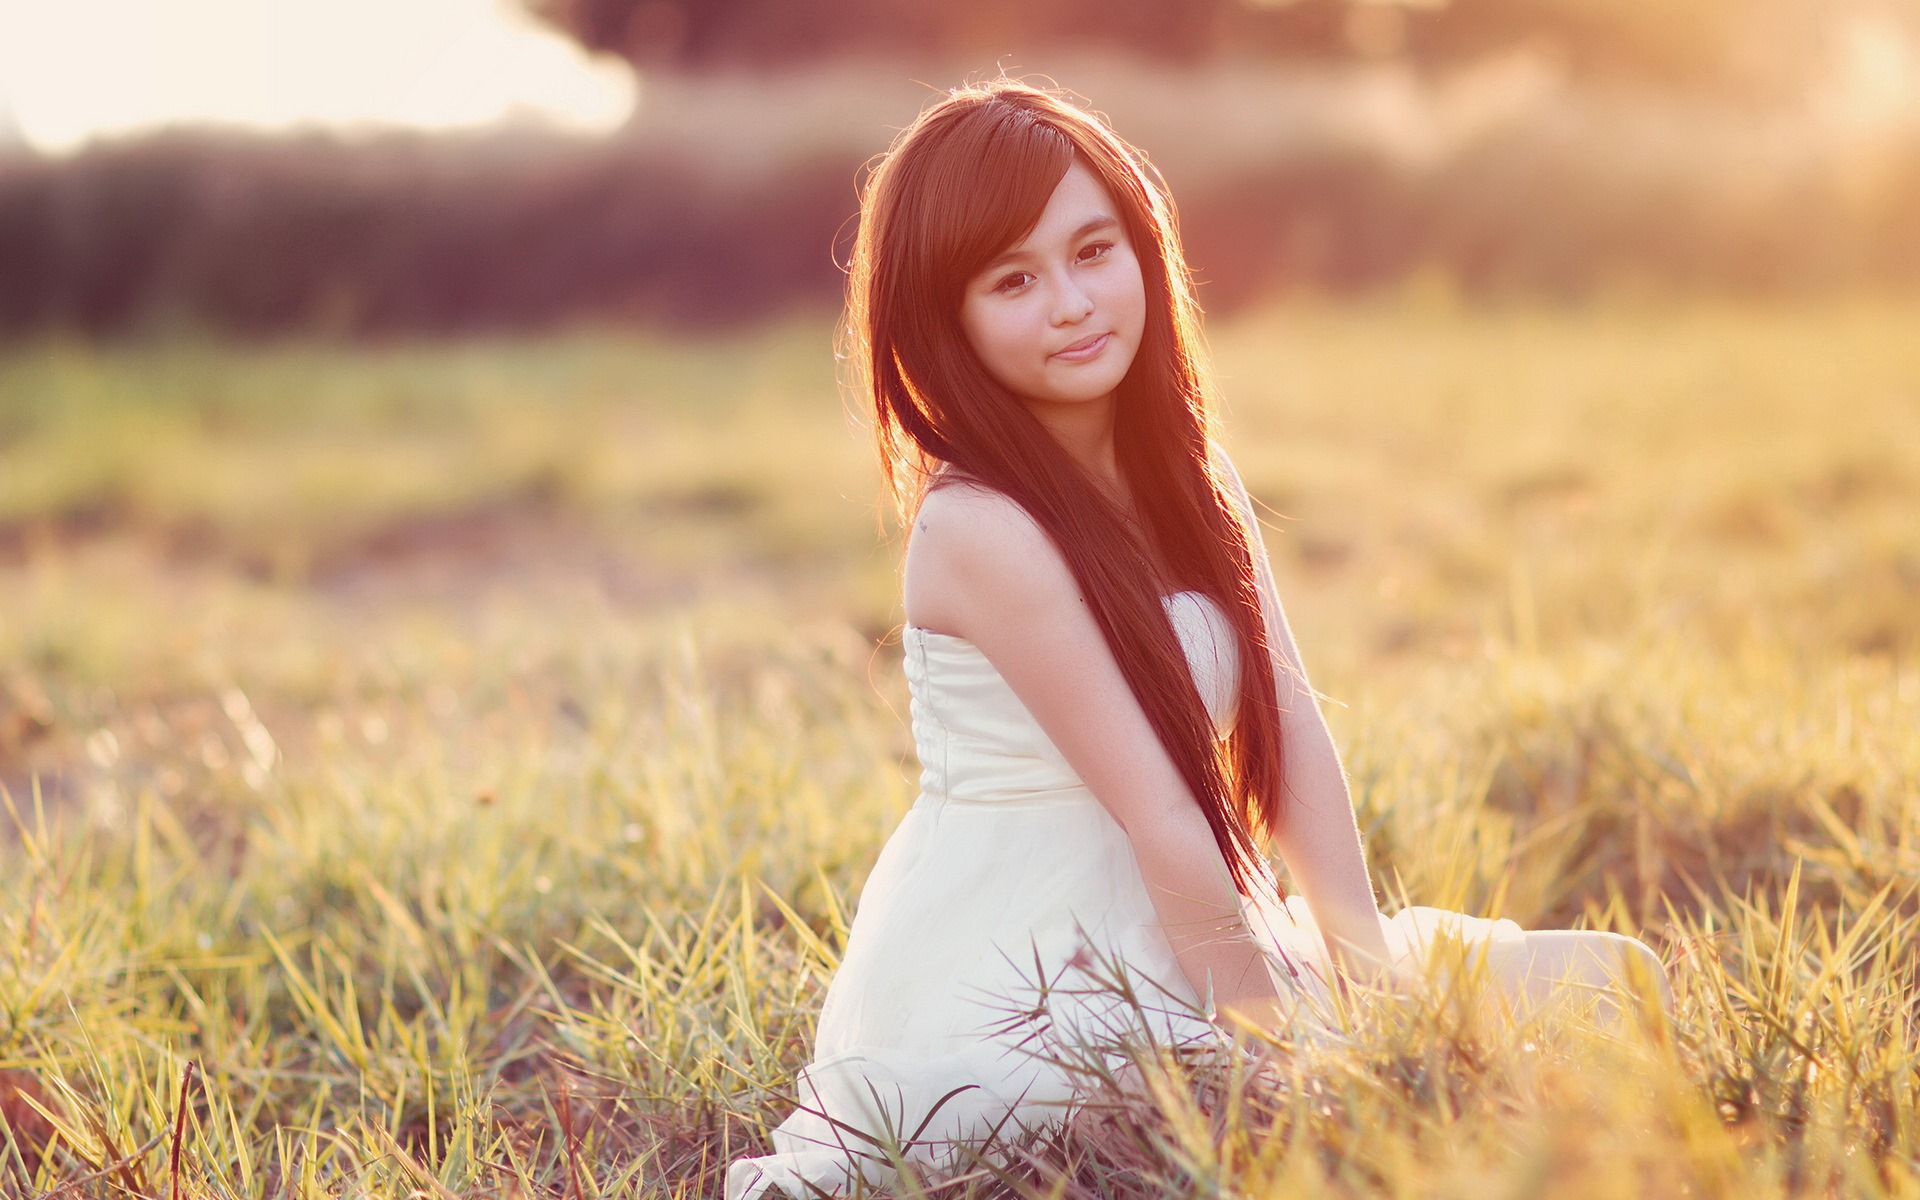 Pure and lovely young Asian girl HD wallpapers collection (5) #29 - 1920x1200